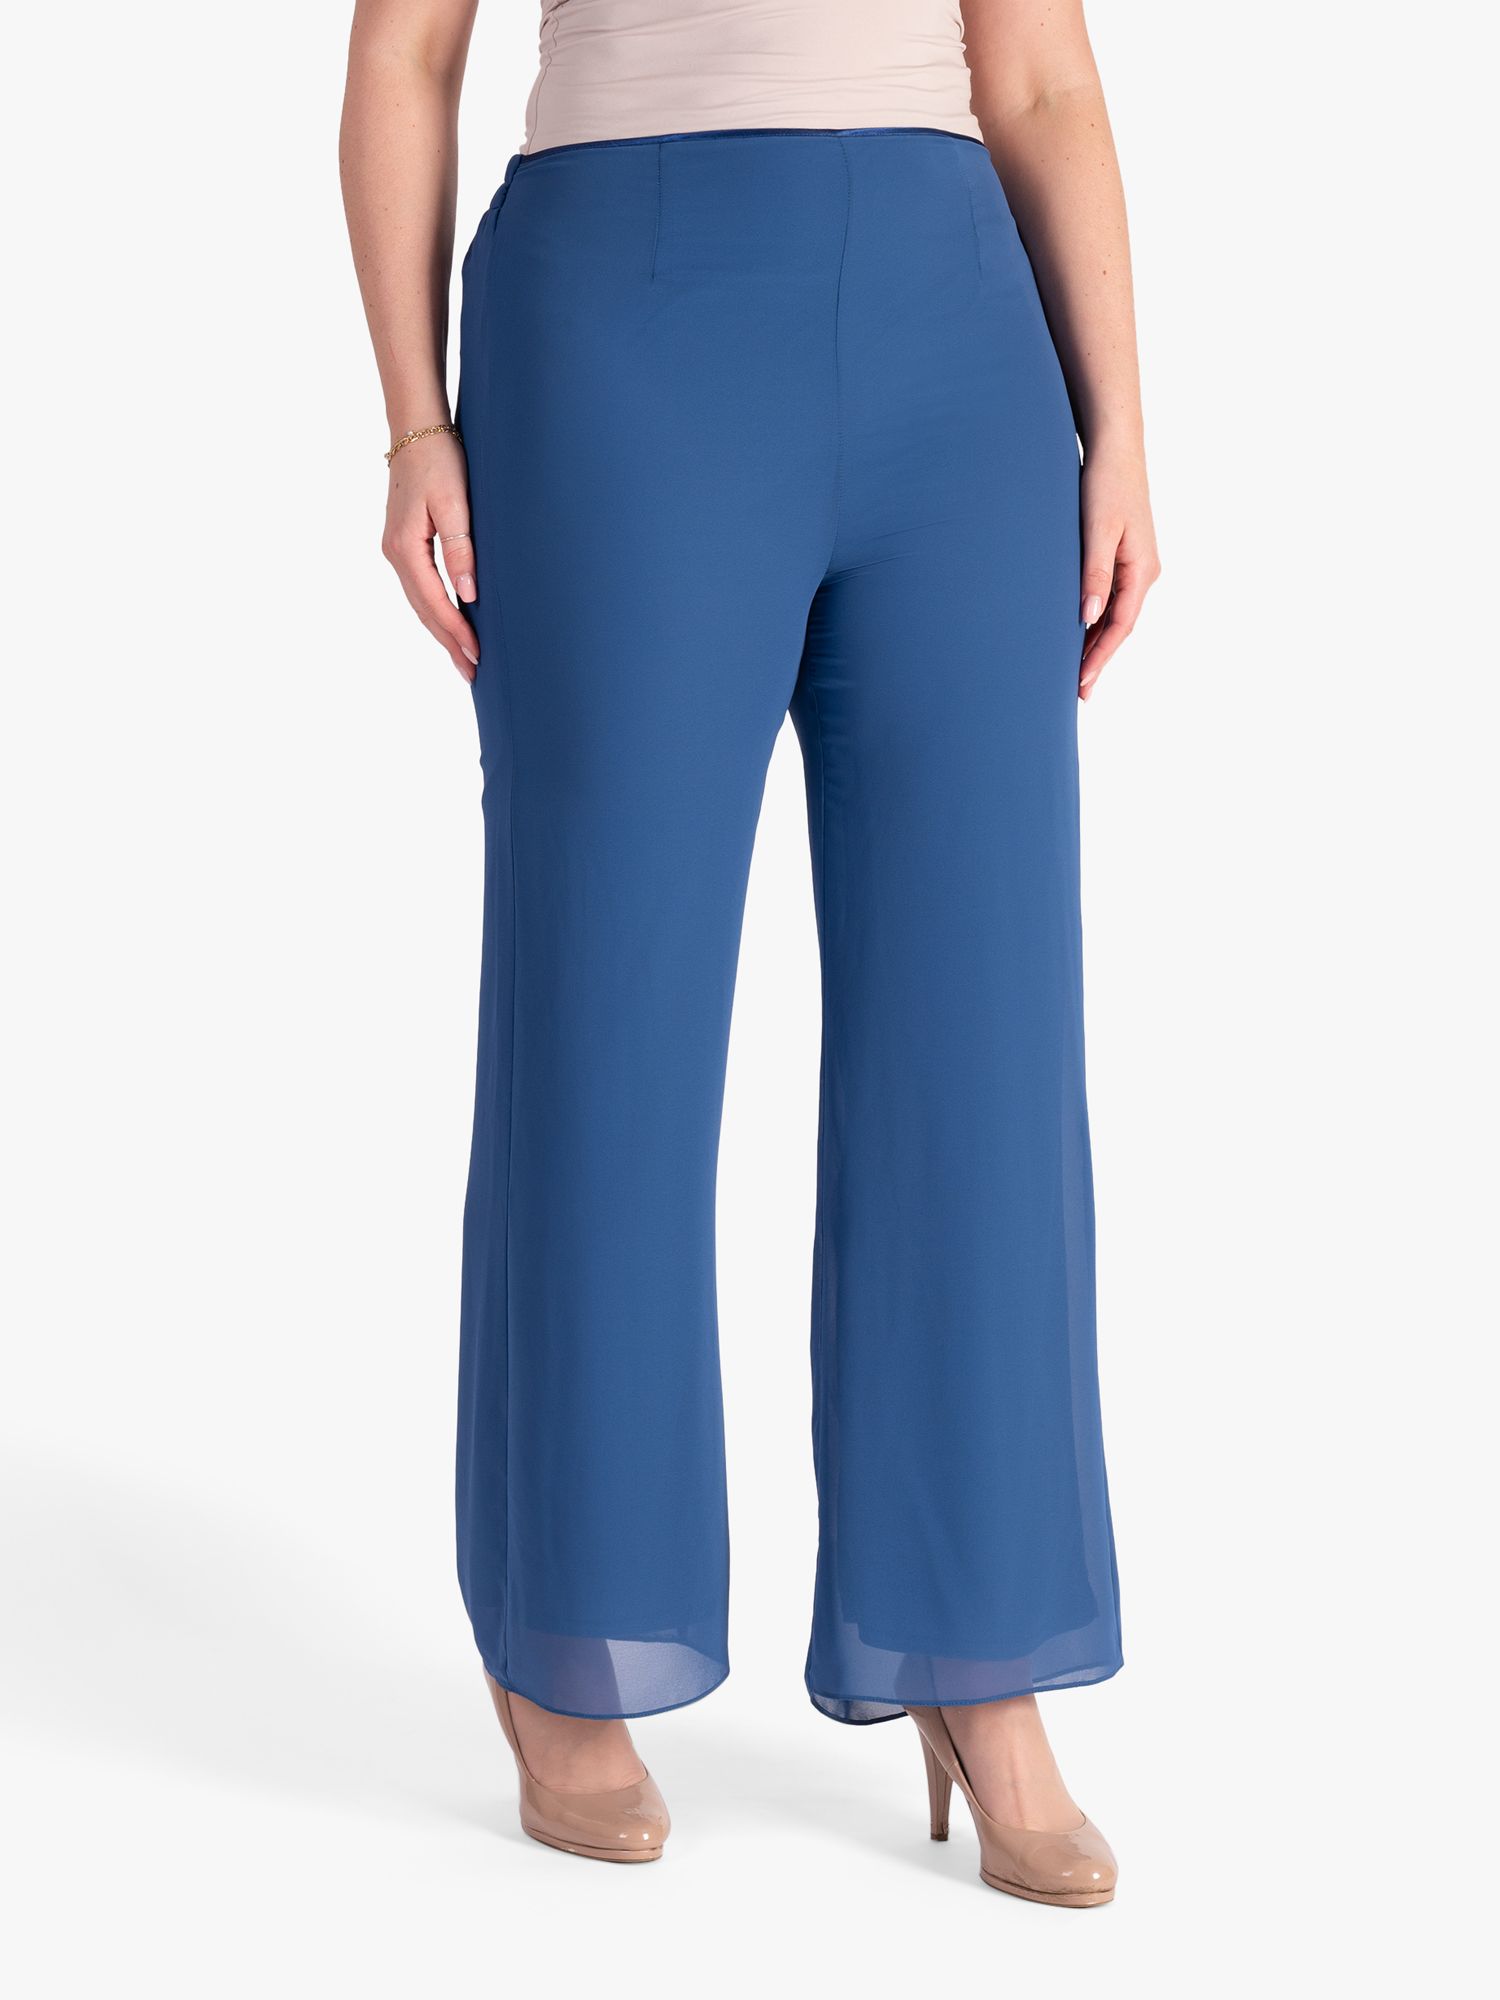 Chesca Jersey Lined Chiffon Trousers